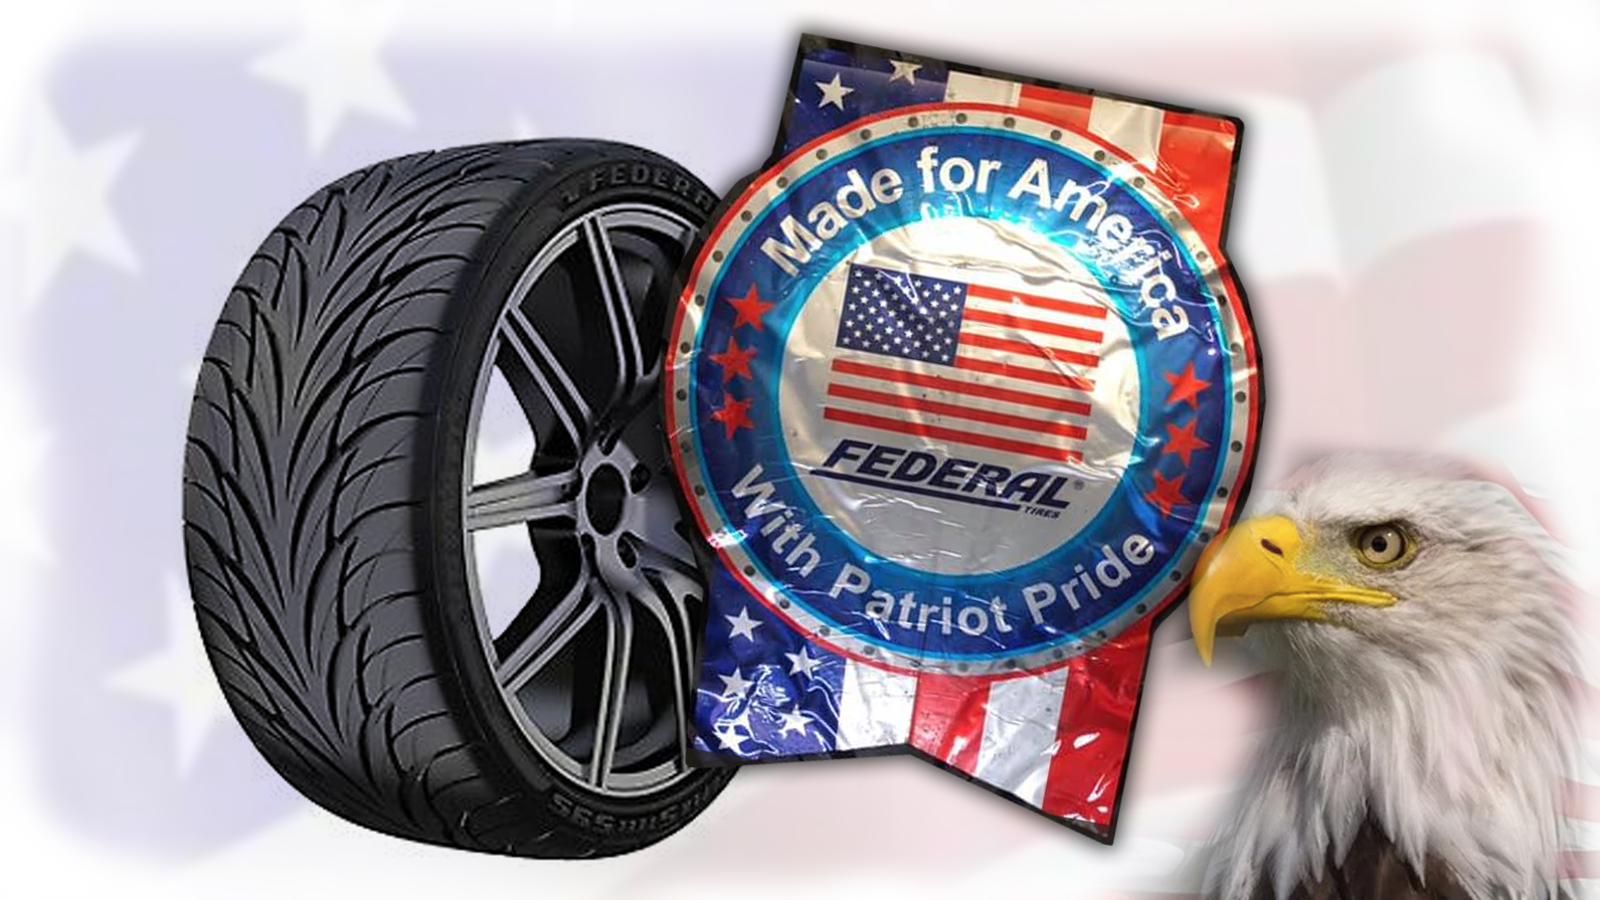 federal tires